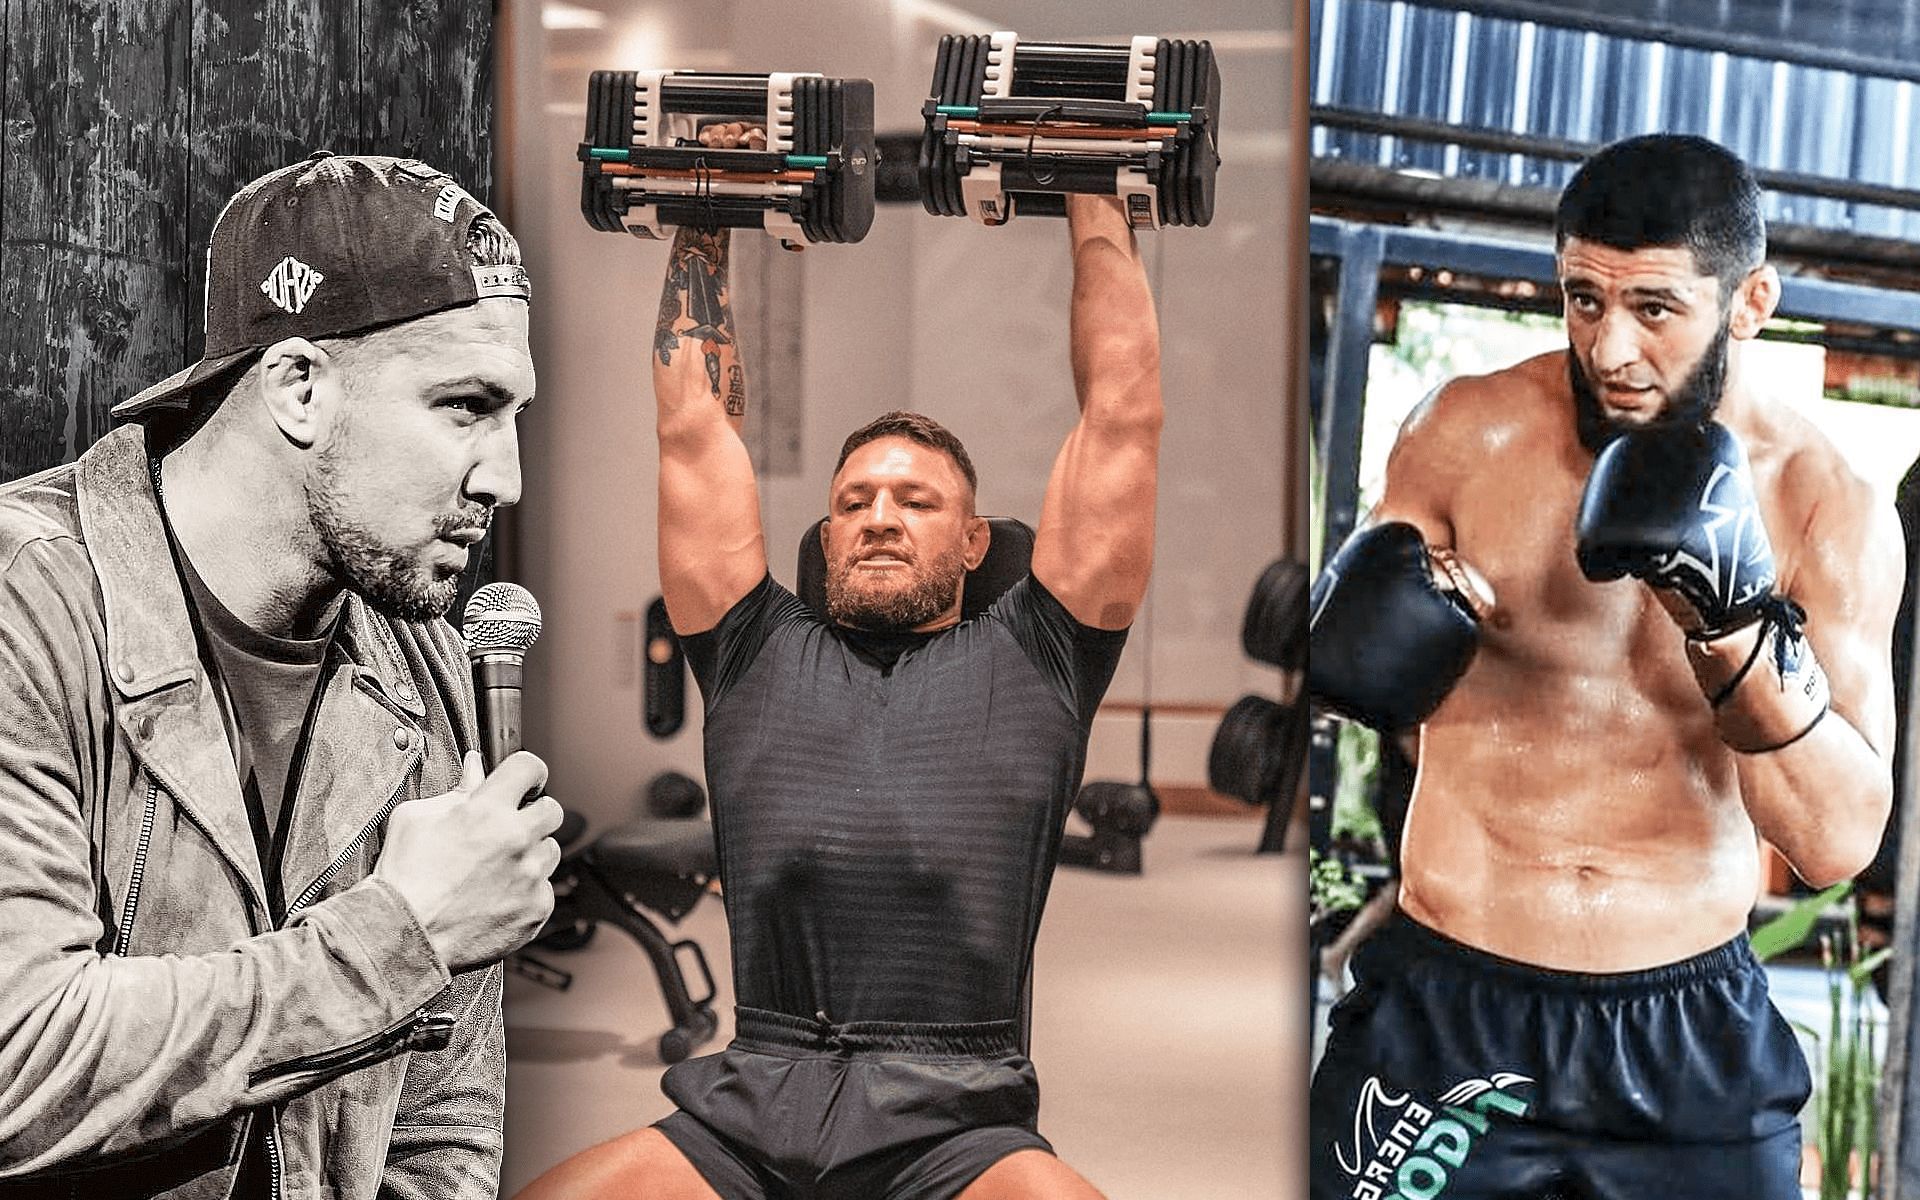 Brendan Schaub (left) has given his take on Khamzat Chimaev (right) offering to train Conor McGregor (center) [All images via Instagram]